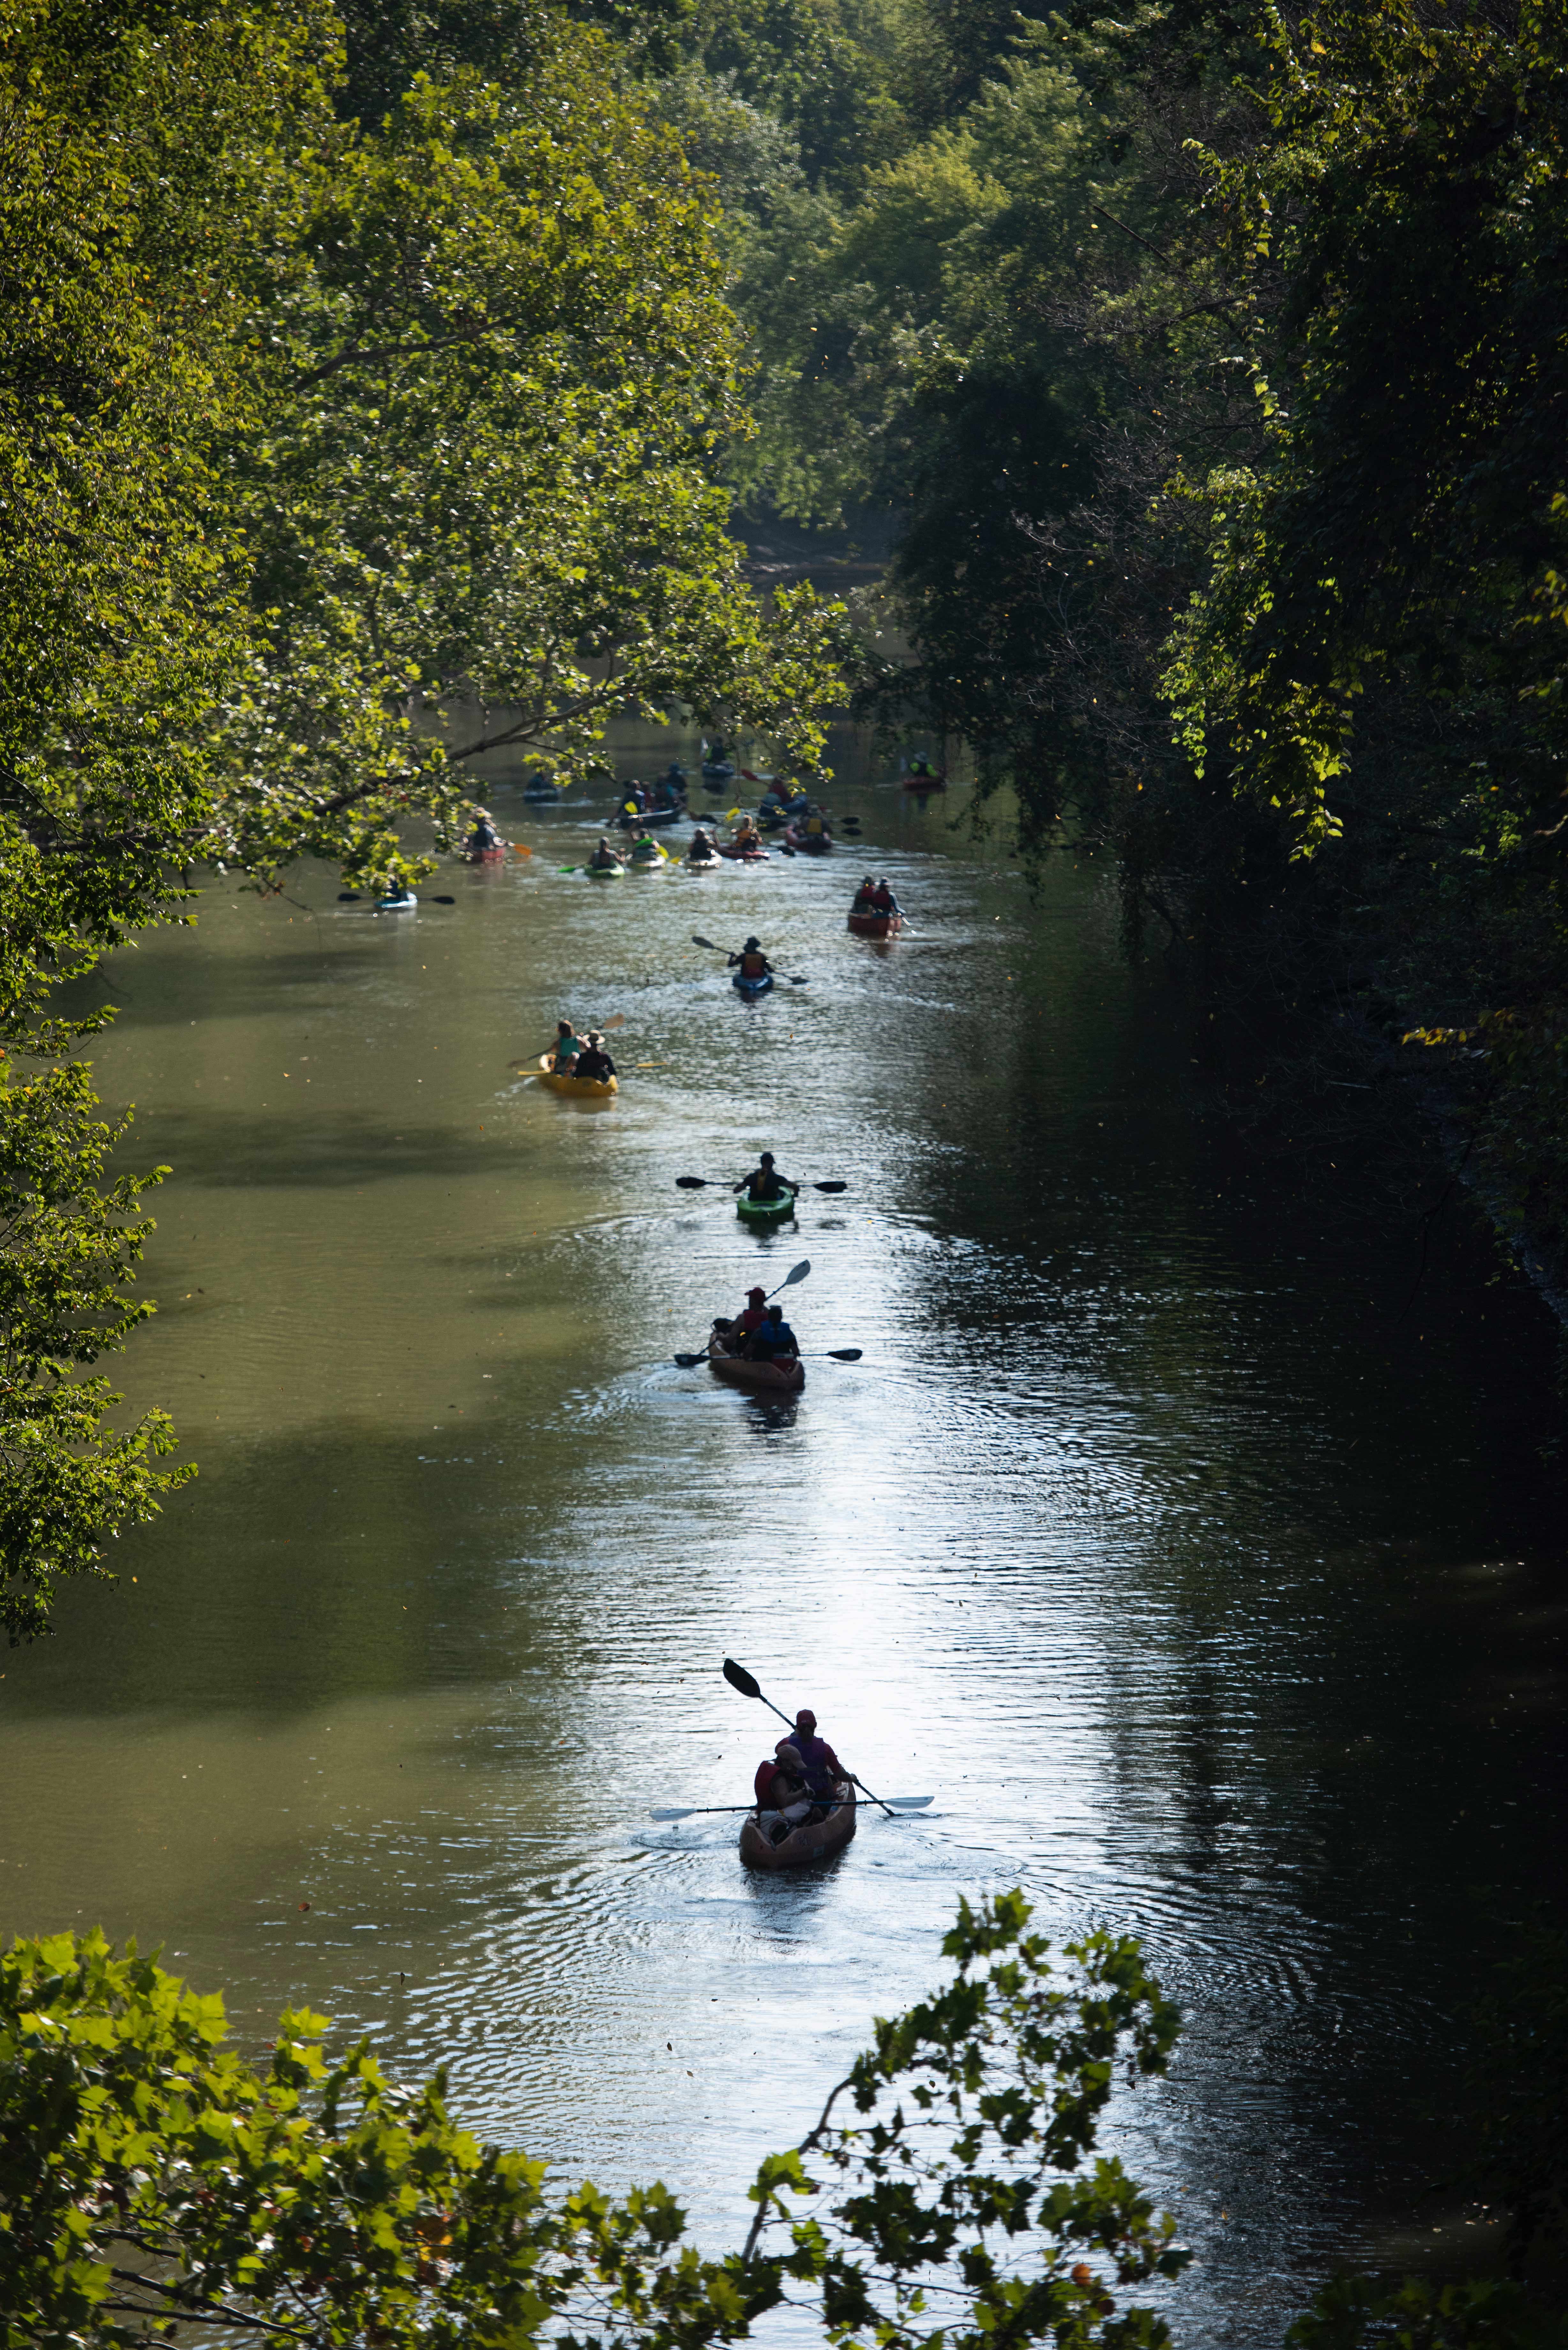 The silhouettes of five people in kayaks in a creek.